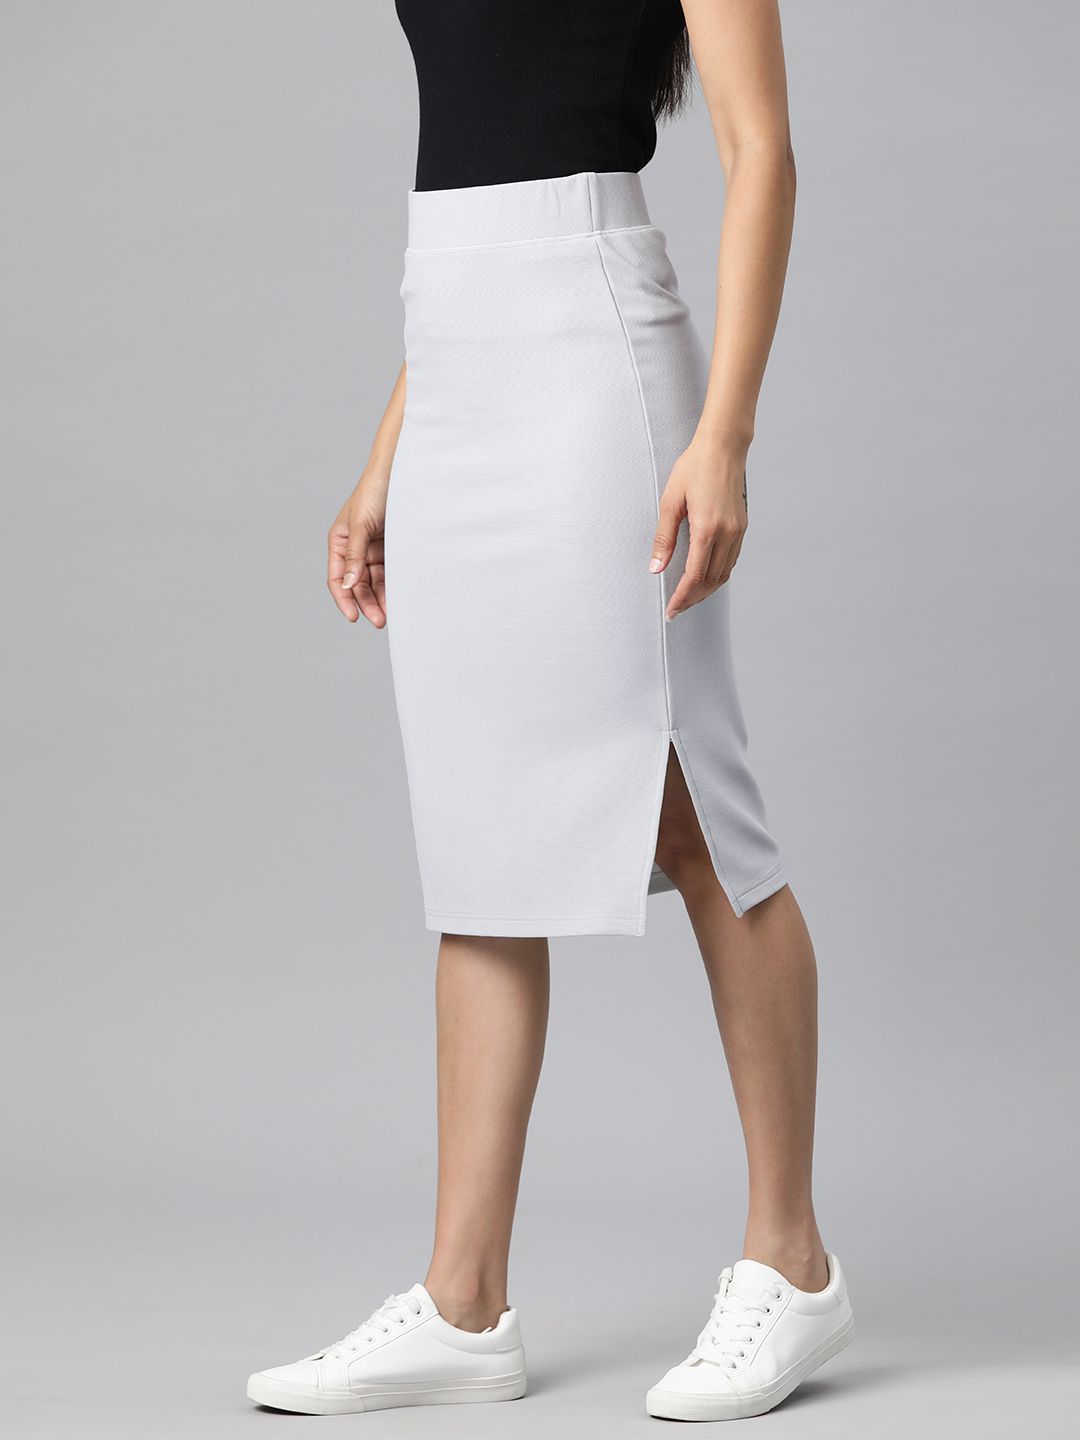 Popnetic Grey Solid Side Slit Pencil Skirt Price in India